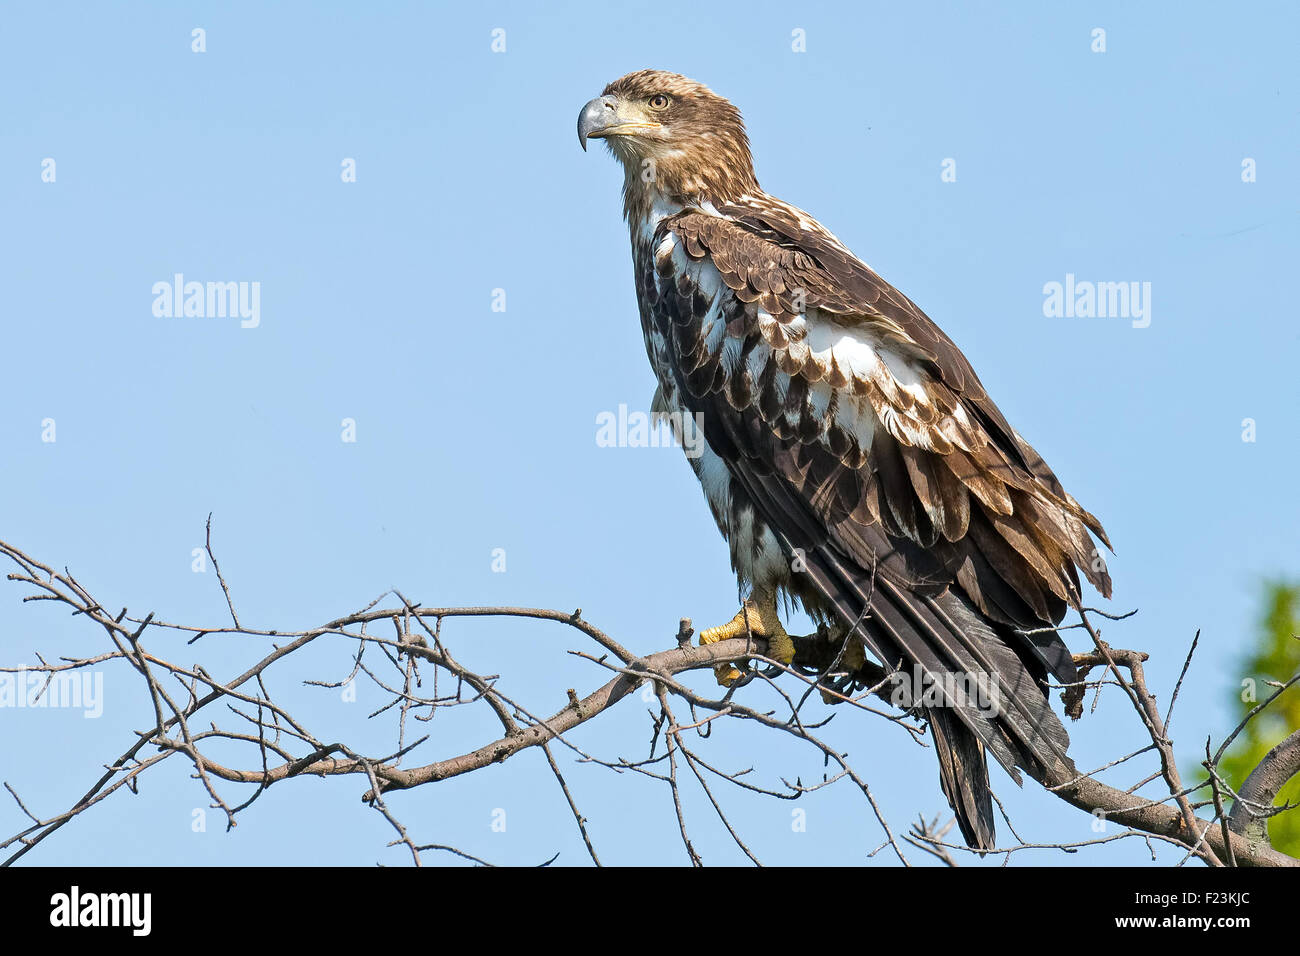 Juvenile American Bald Eagle sitting in a tree Stock Photo